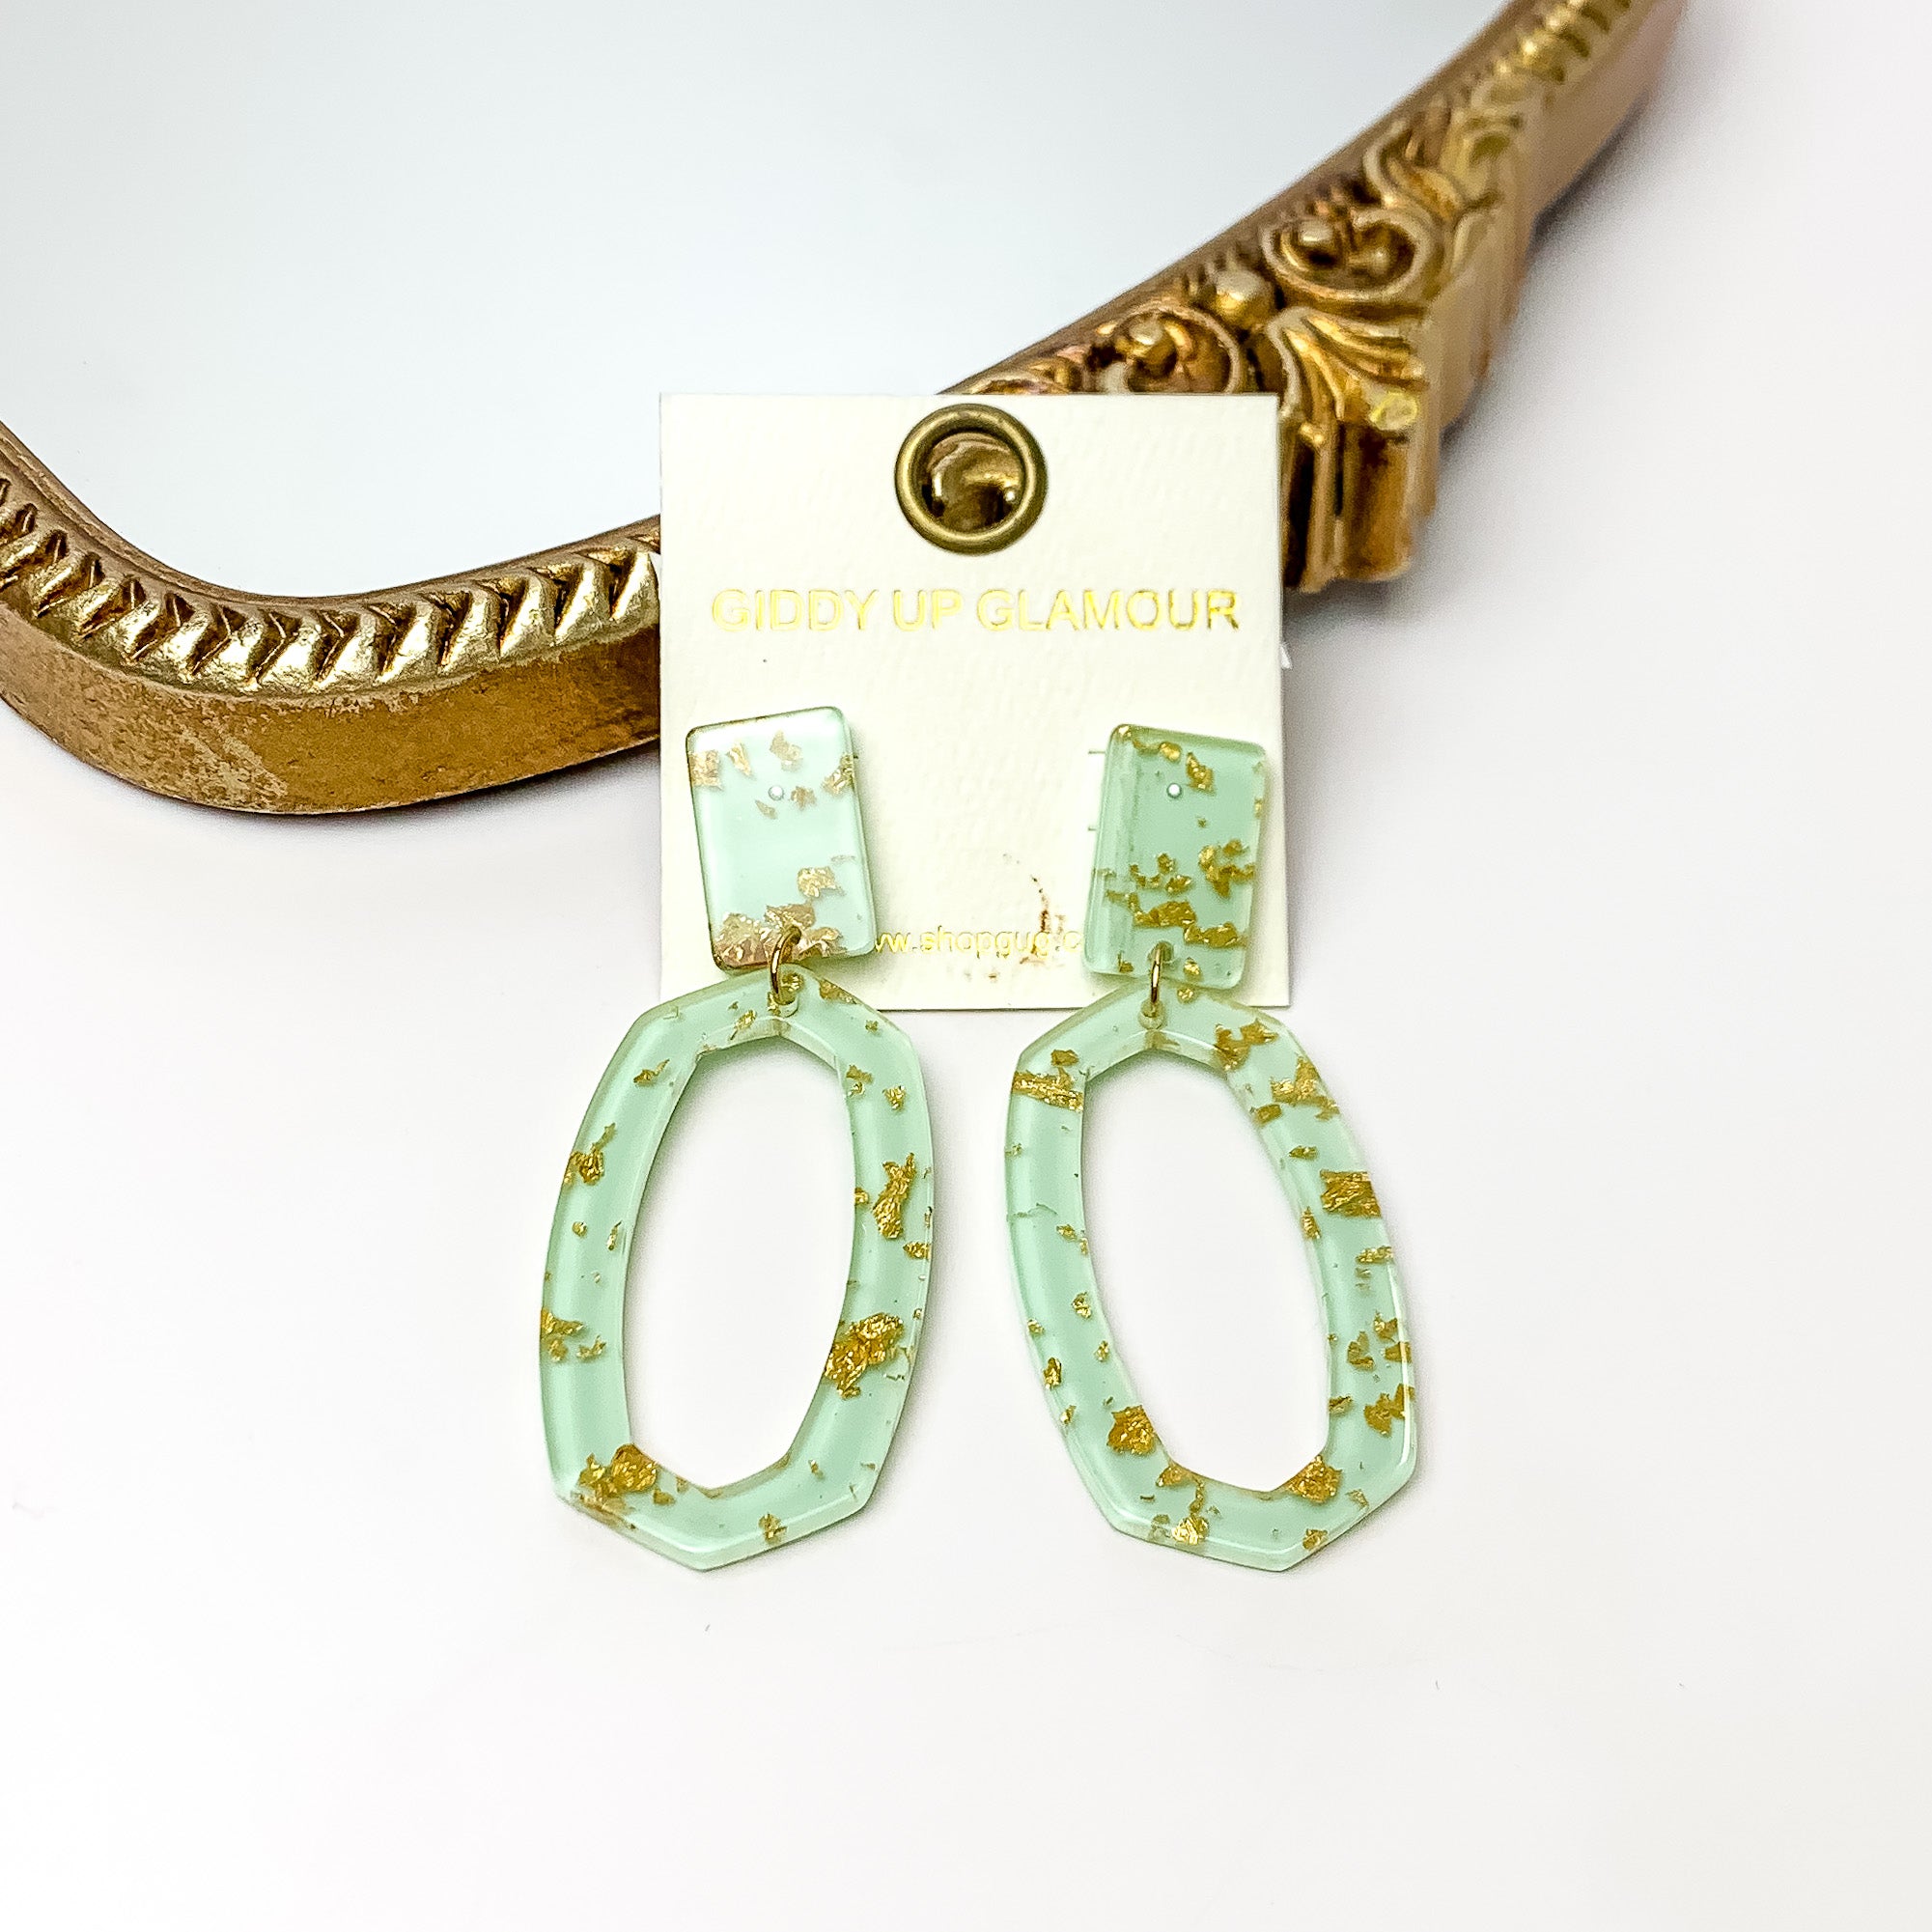 Miami Marble Open Oval Earrings in Light Green. Pictured on a white background with the earrings against a gold frame.